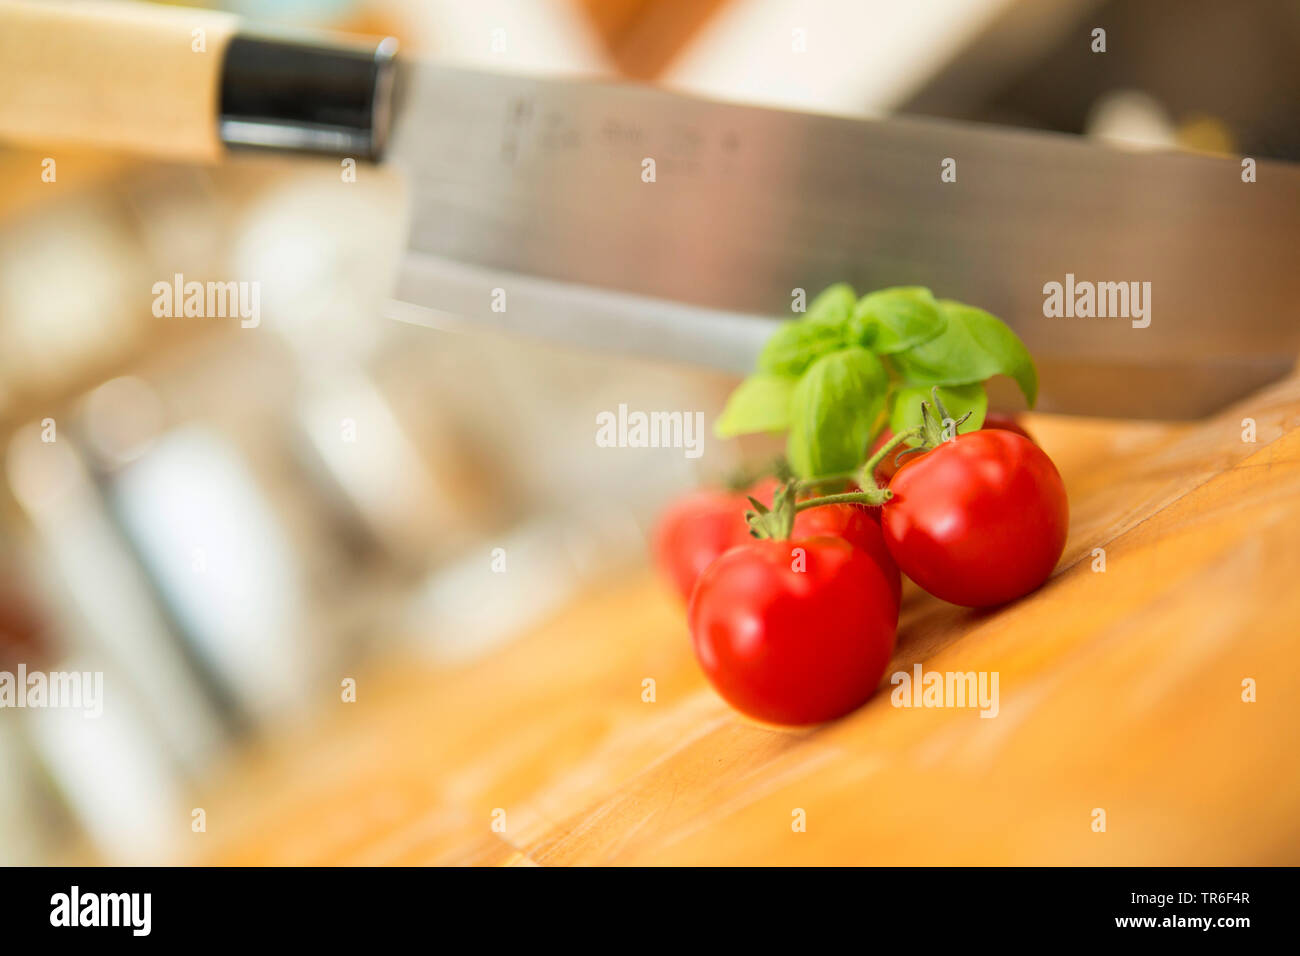 garden tomato (Solanum lycopersicum, Lycopersicon esculentum), cocktail tomatoes with tulsi and kitchen knife on a wooden board, Germany Stock Photo